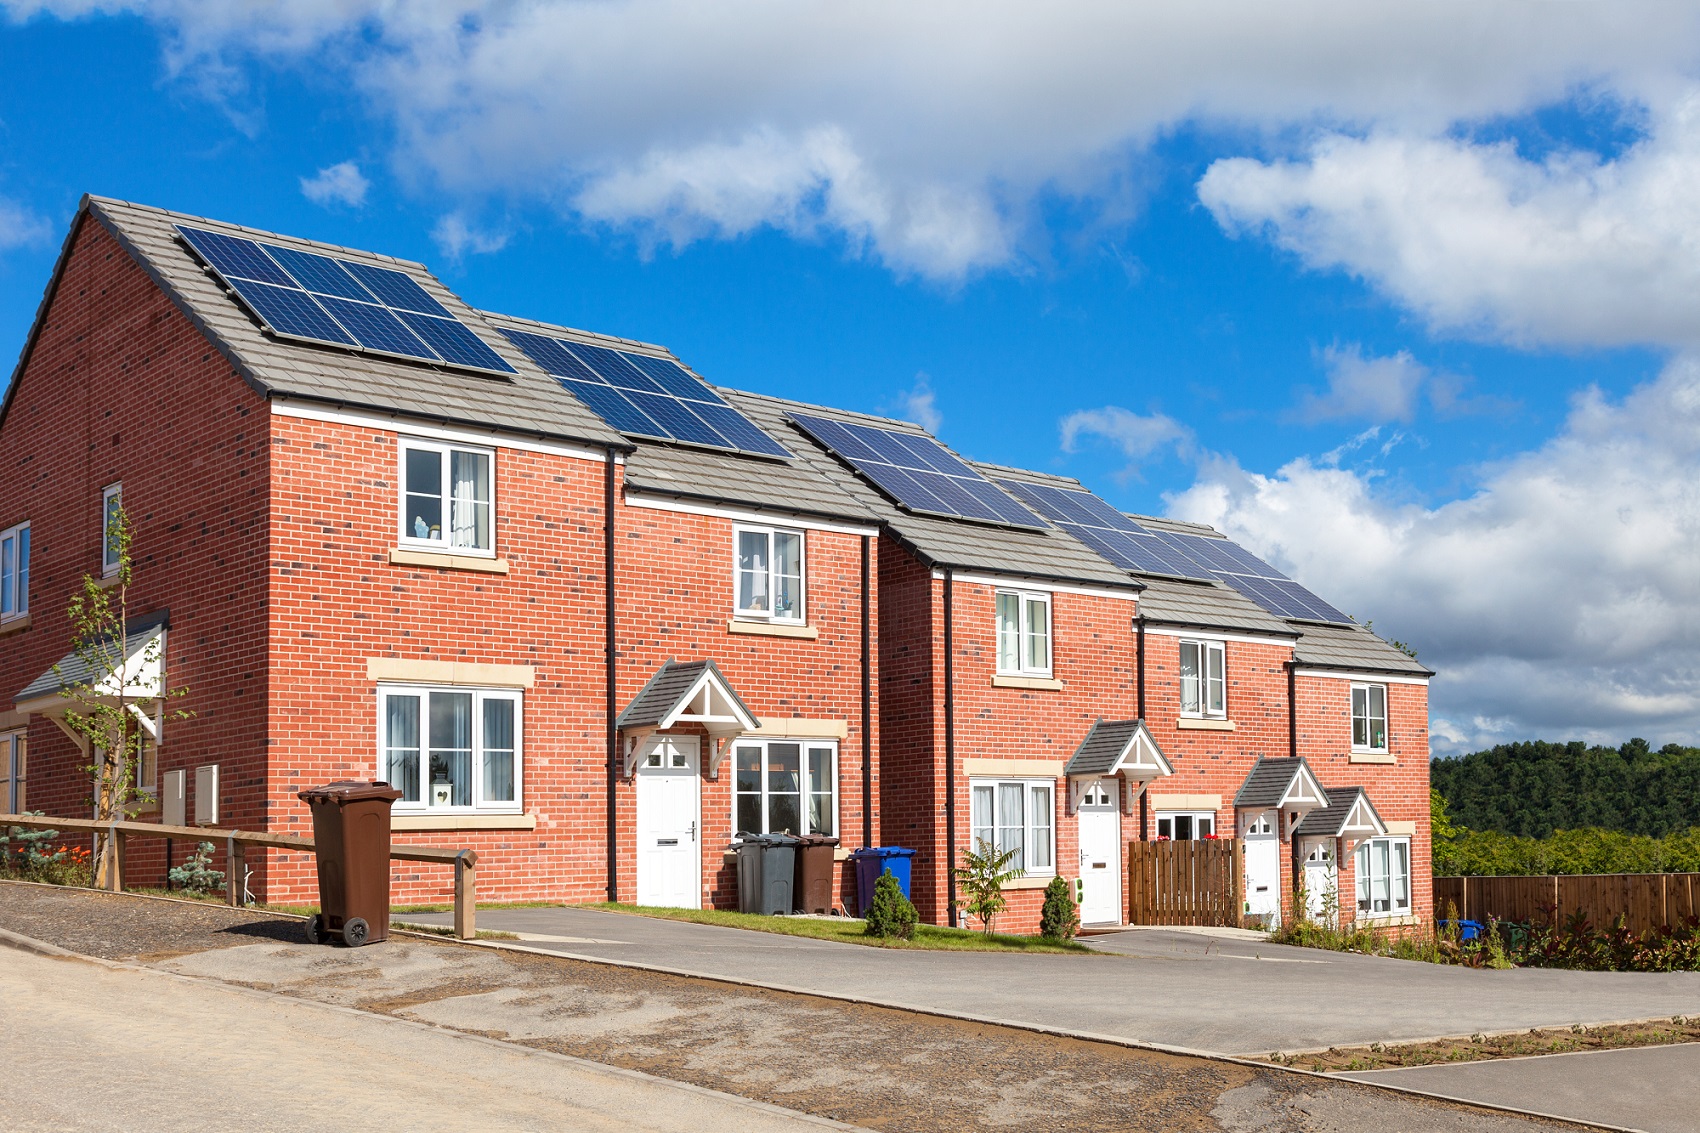 Solar Together - cut carbon emissions and save on energy bills 